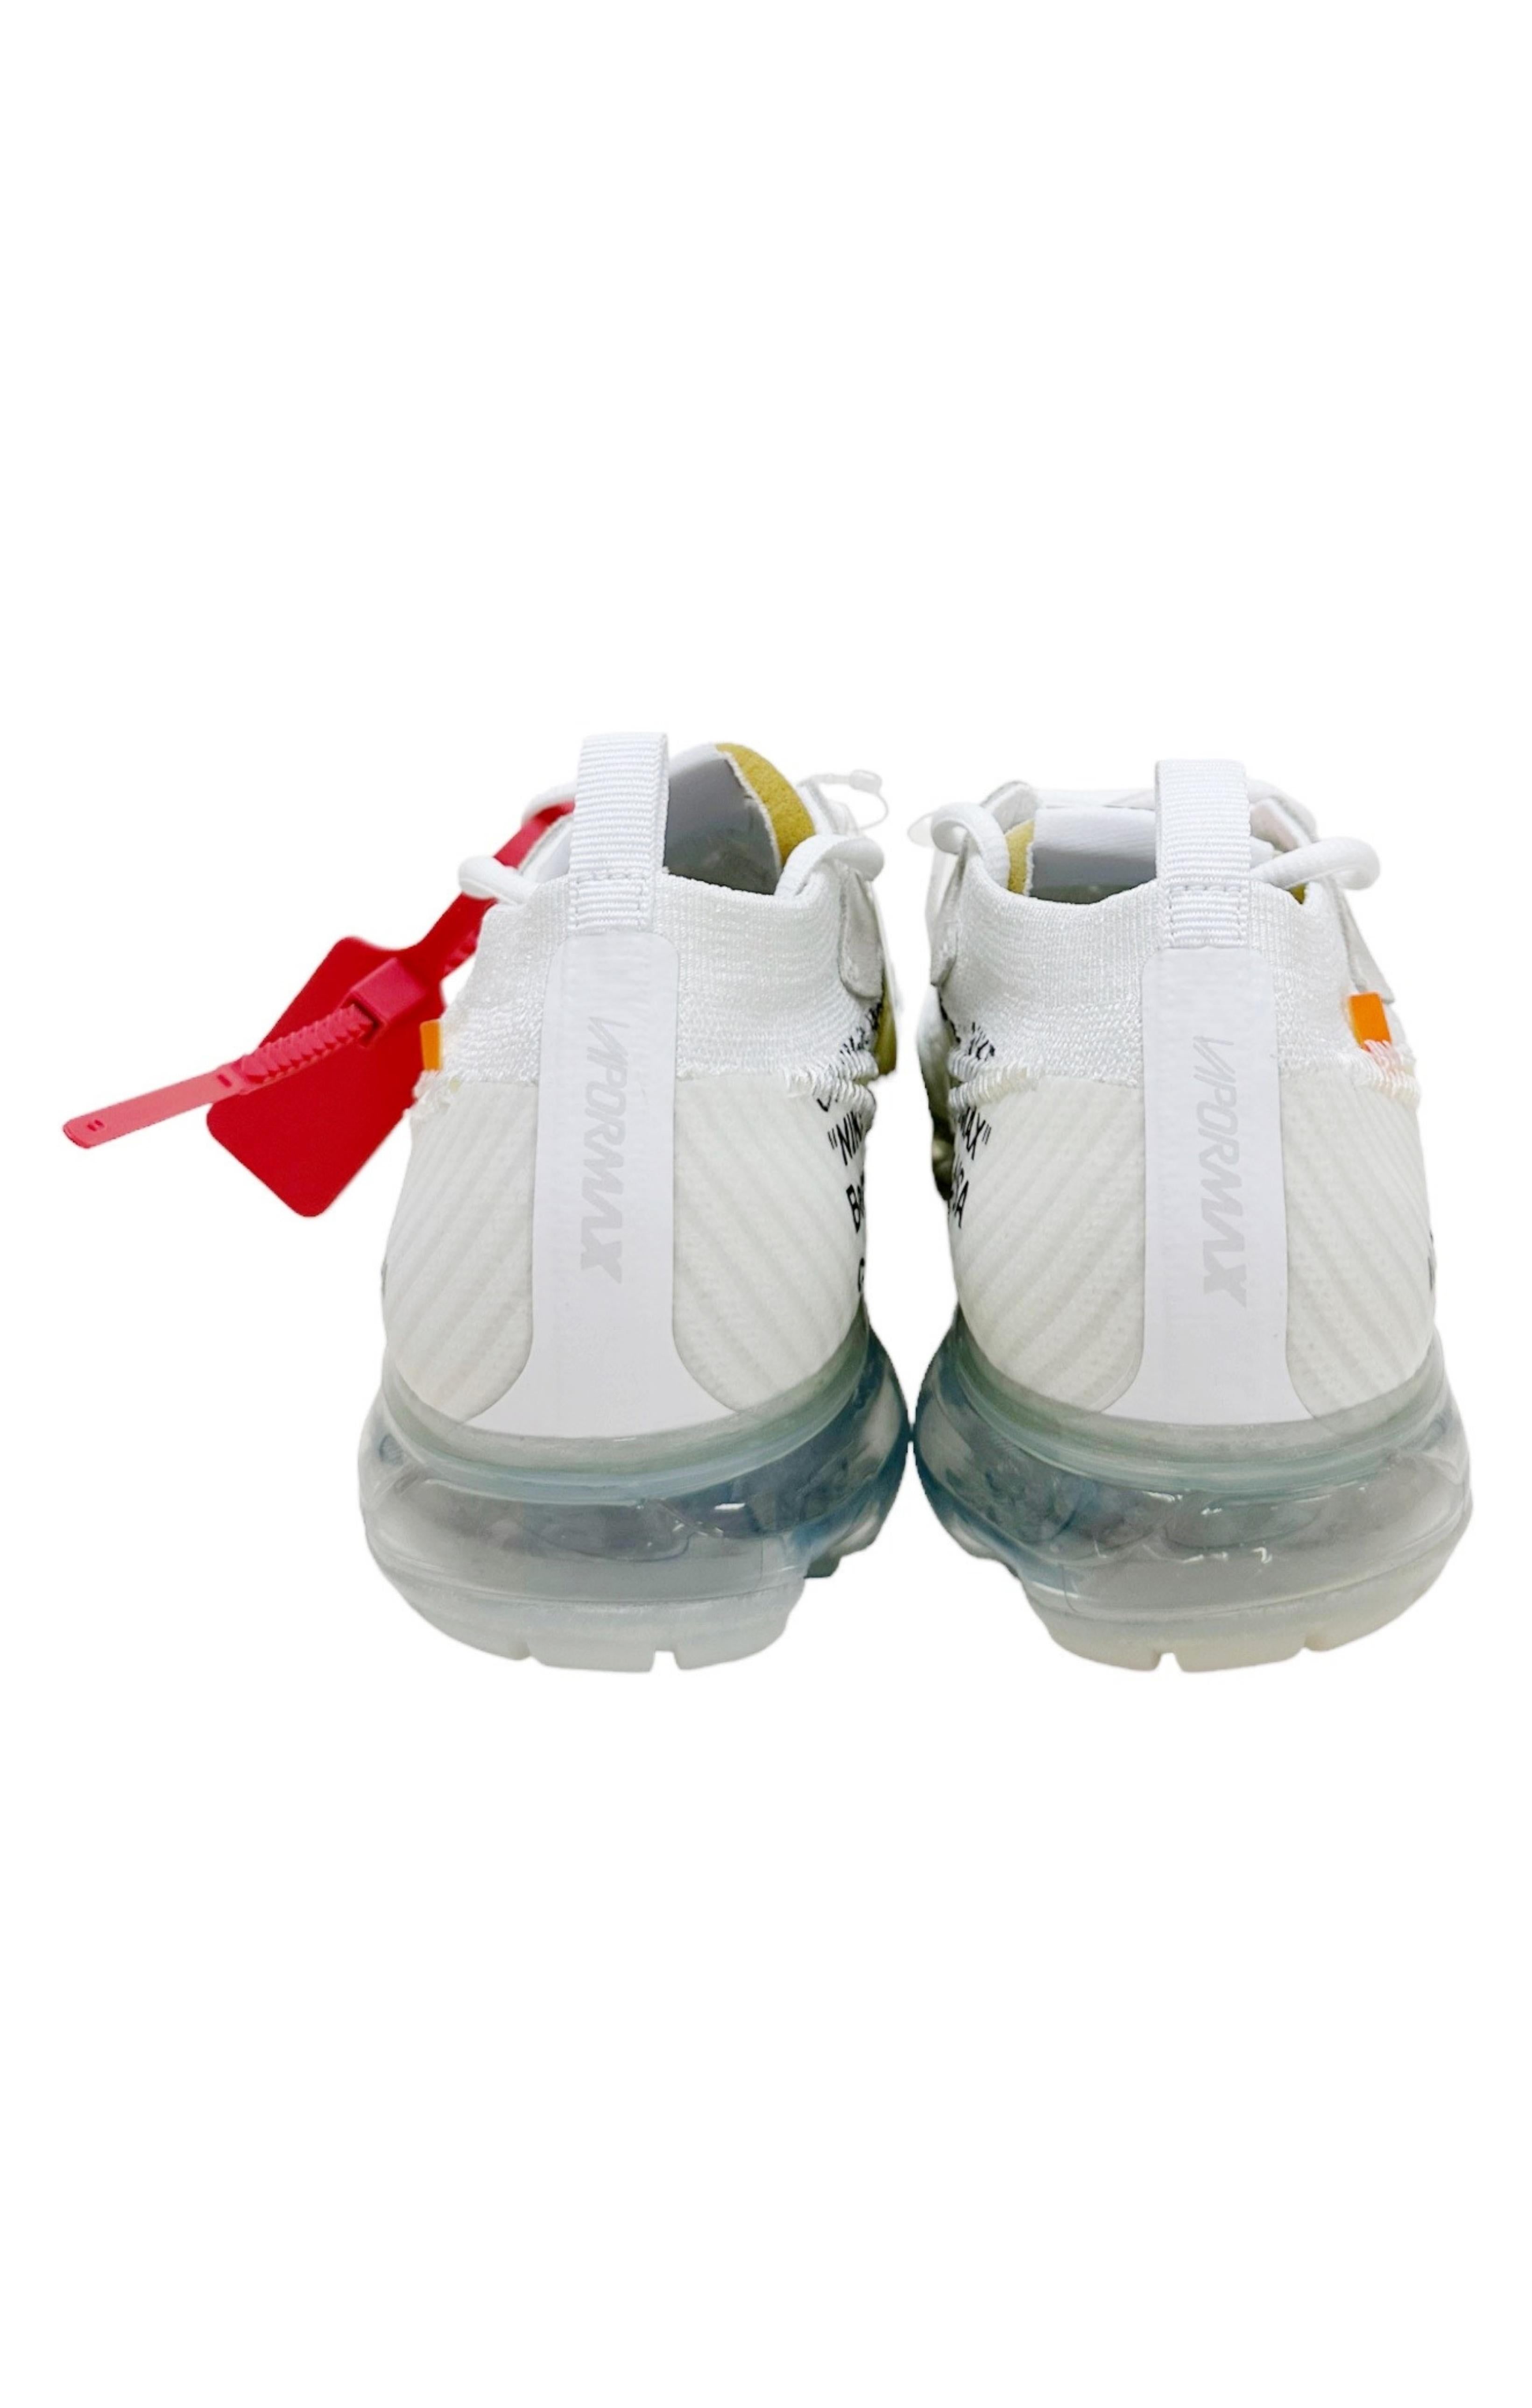 NIKE x OFF-WHITE (RARE & NEW) Sneakers Size: 7.5